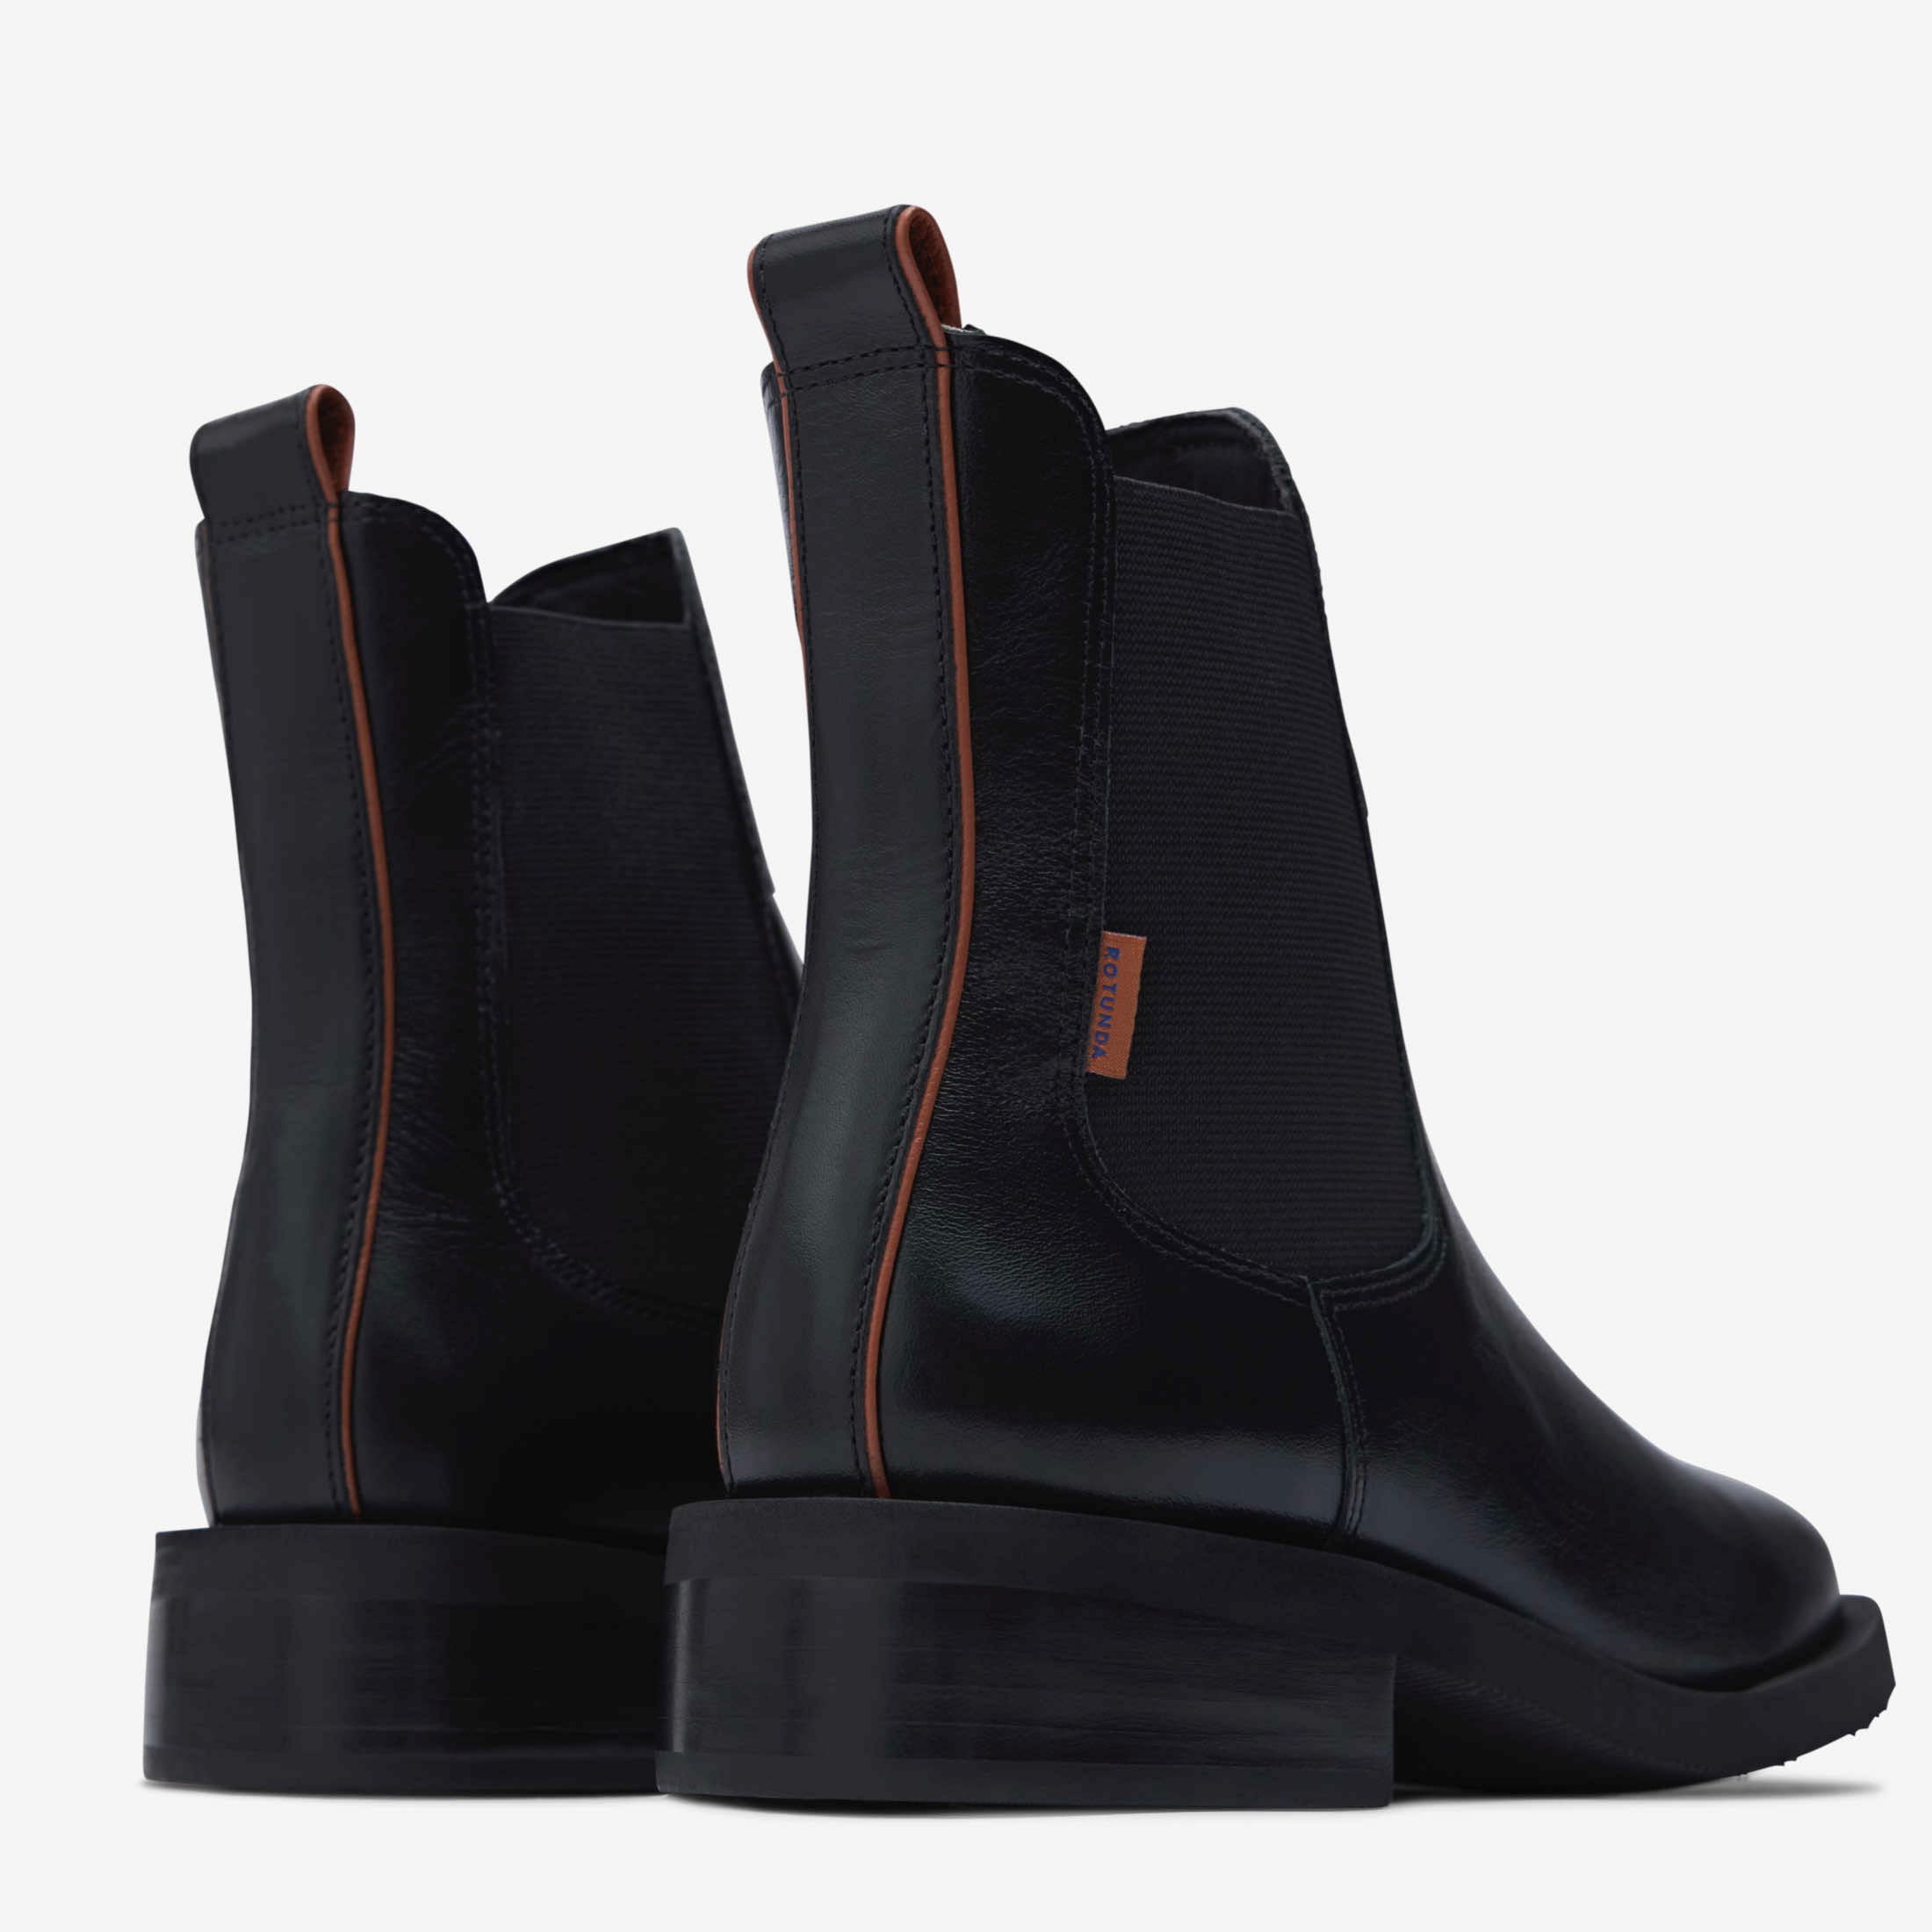 Lil Chelsea Boots